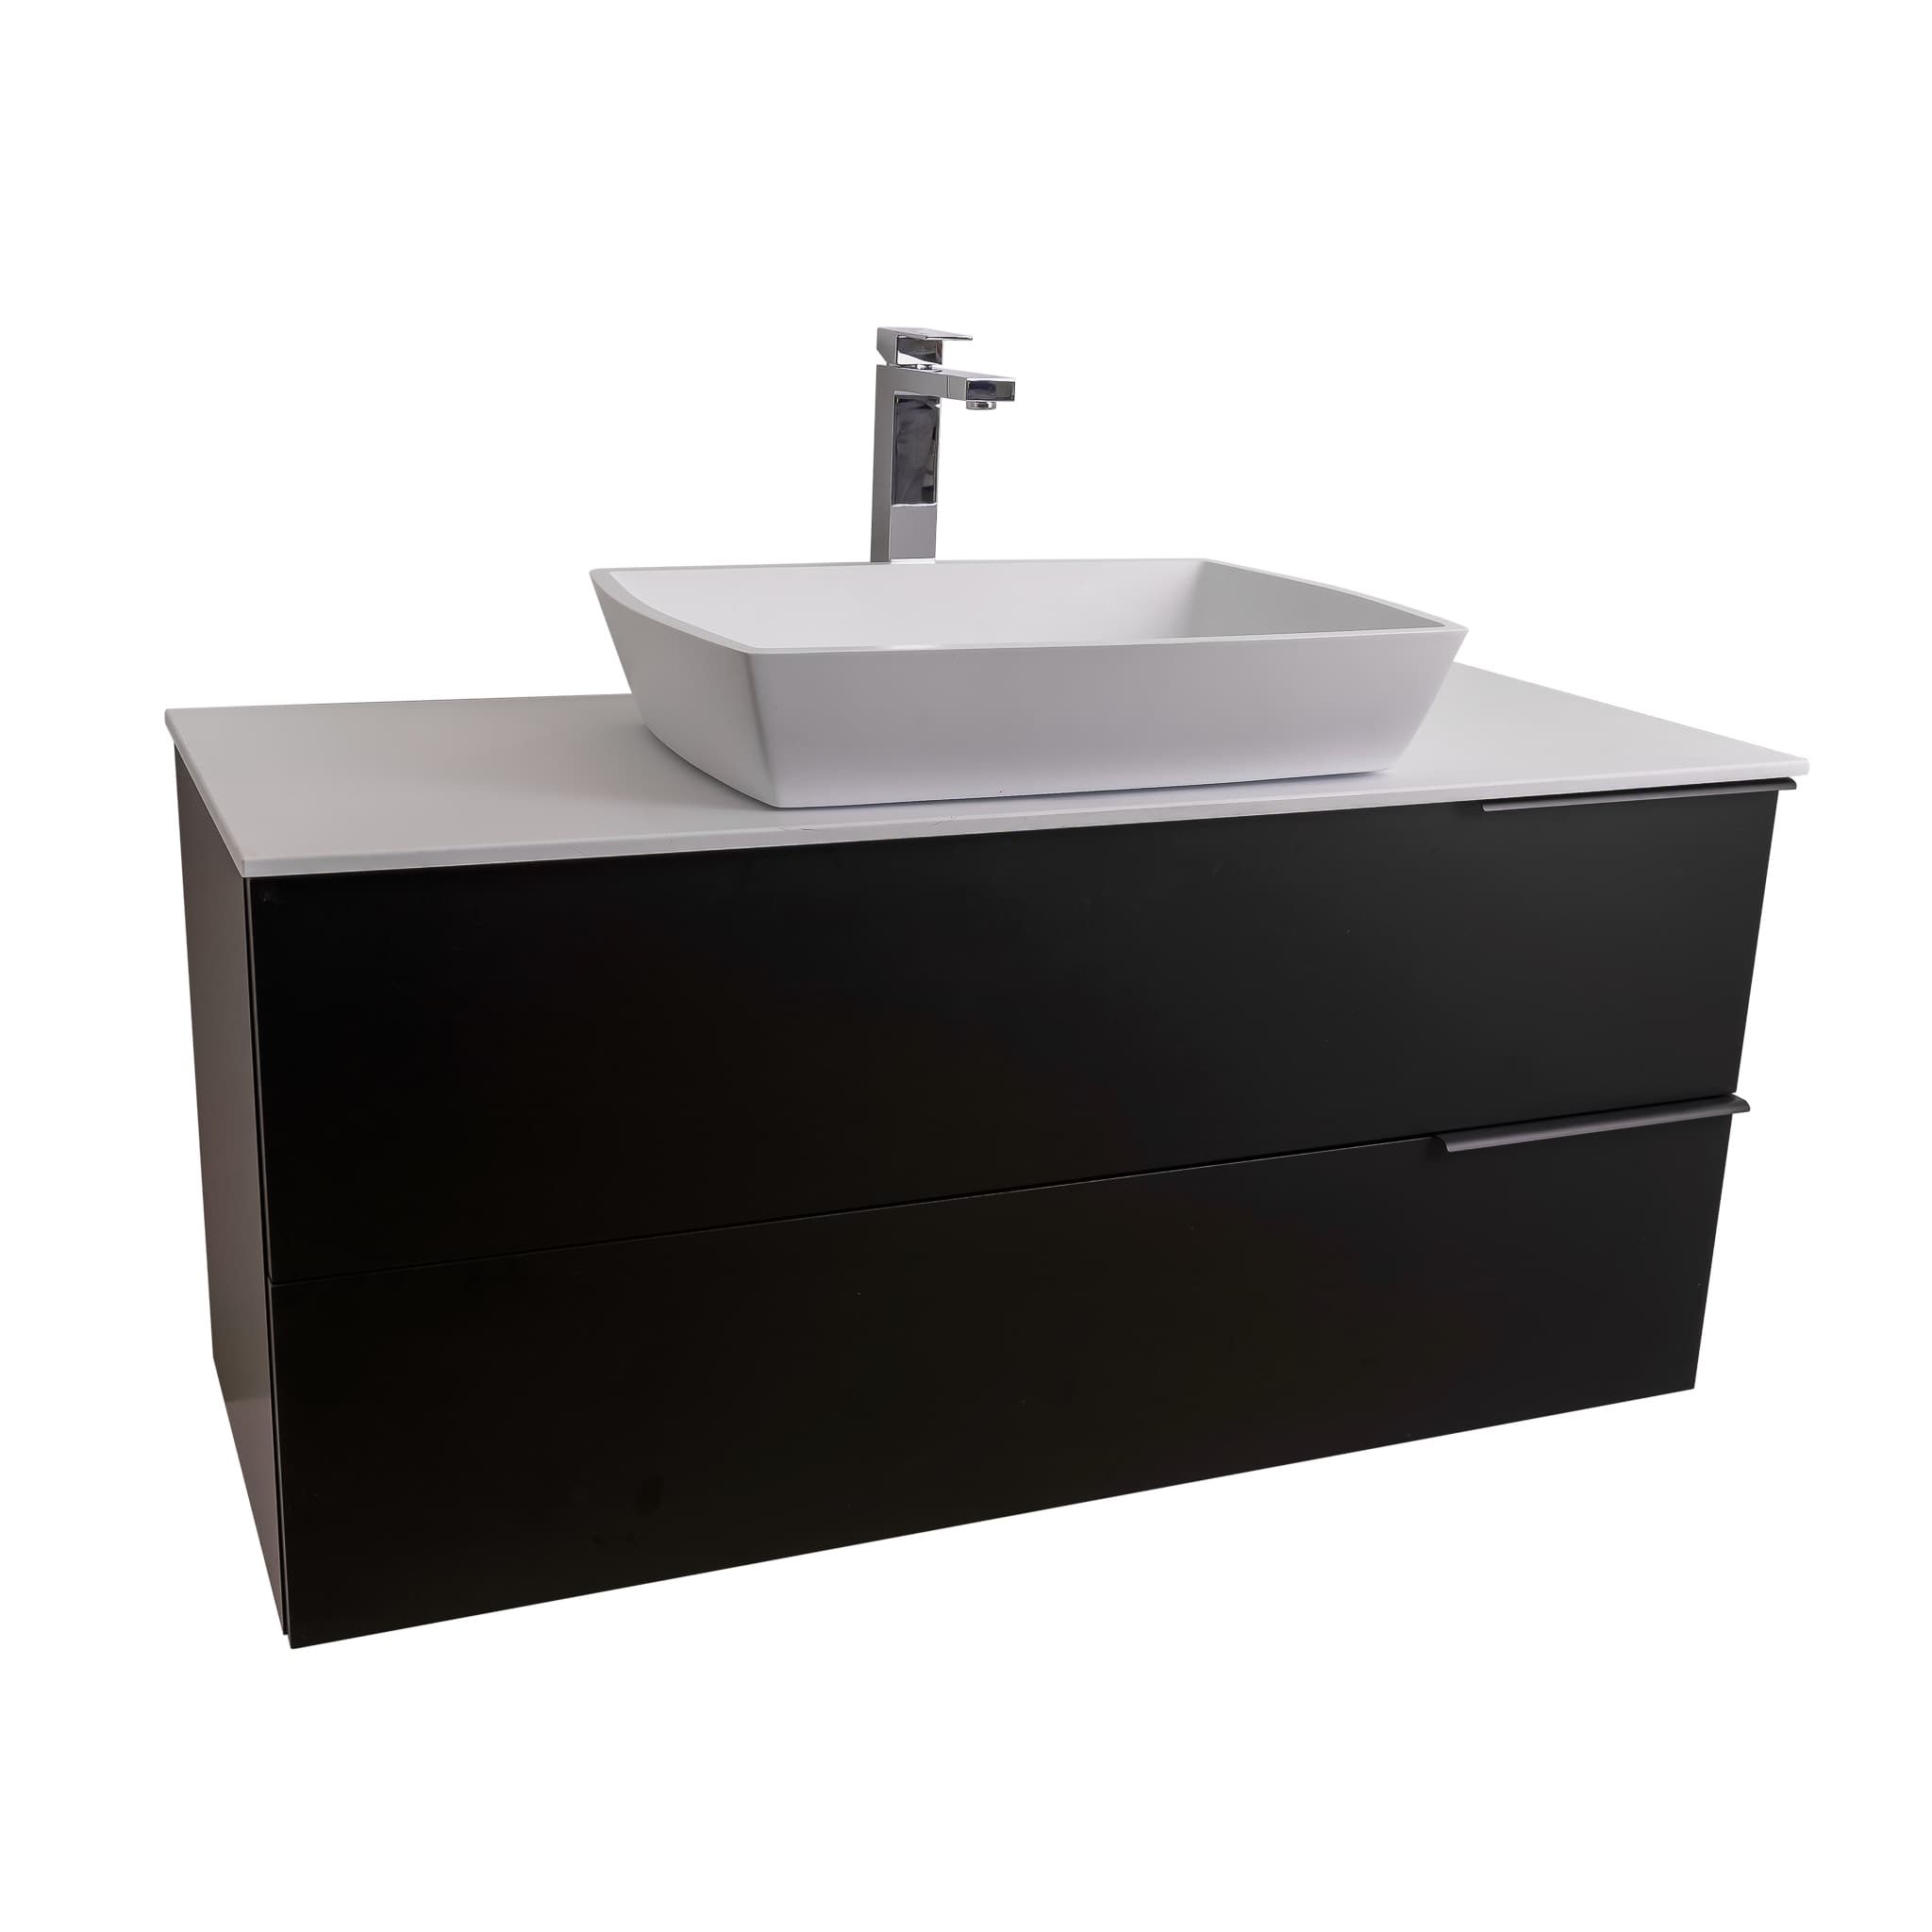 Mallorca 47.5 Matte Black Cabinet, Solid Surface Flat White Counter And Square Solid Surface White Basin 1316, Wall Mounted Modern Vanity Set